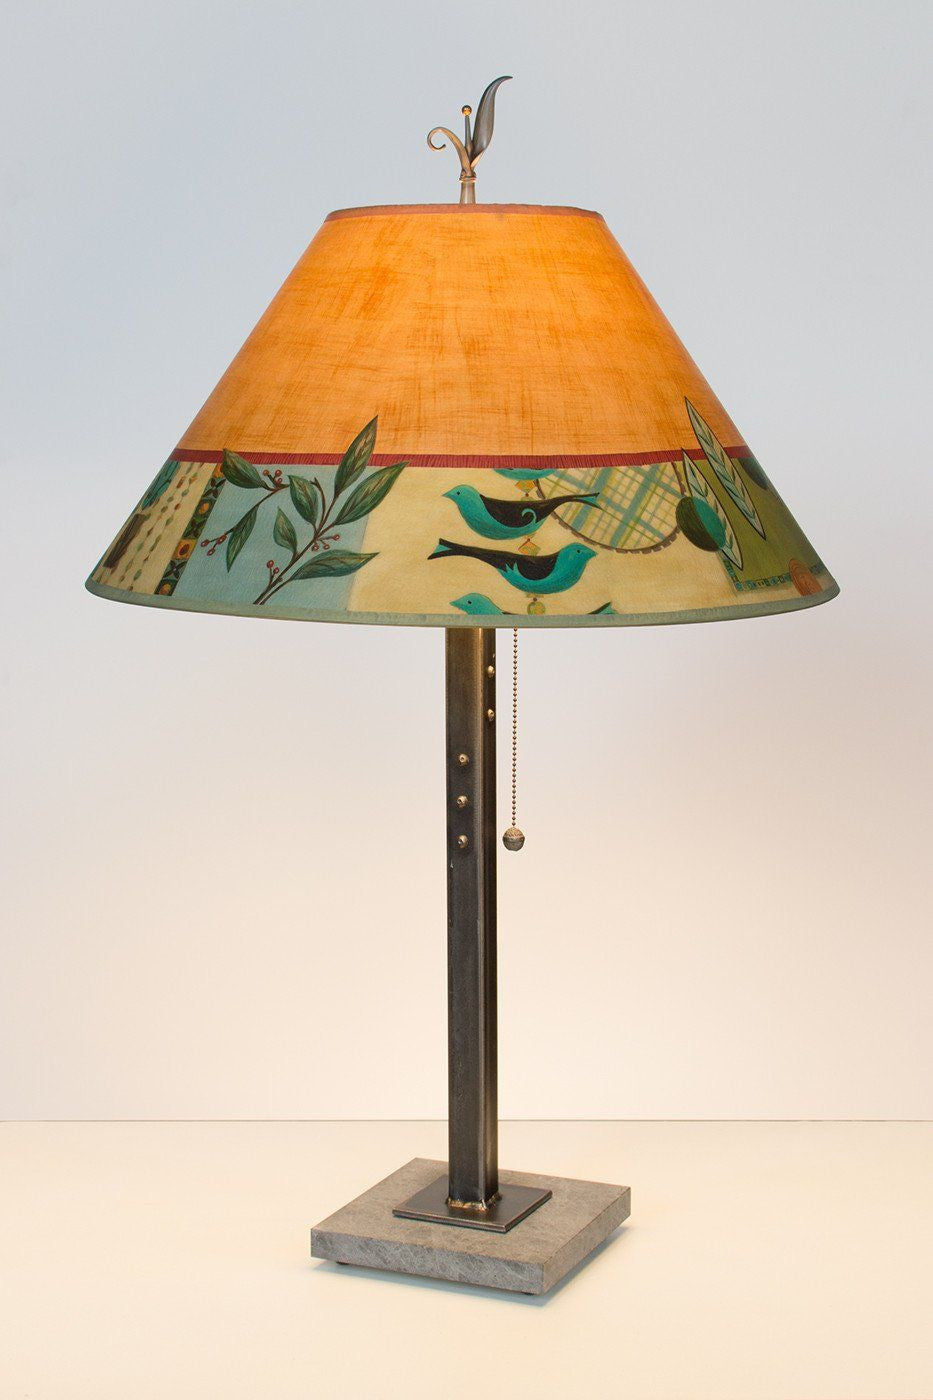 Janna Ugone & Co Table Lamps Steel Table Lamp with Large Conical Shade in New Capri Spice